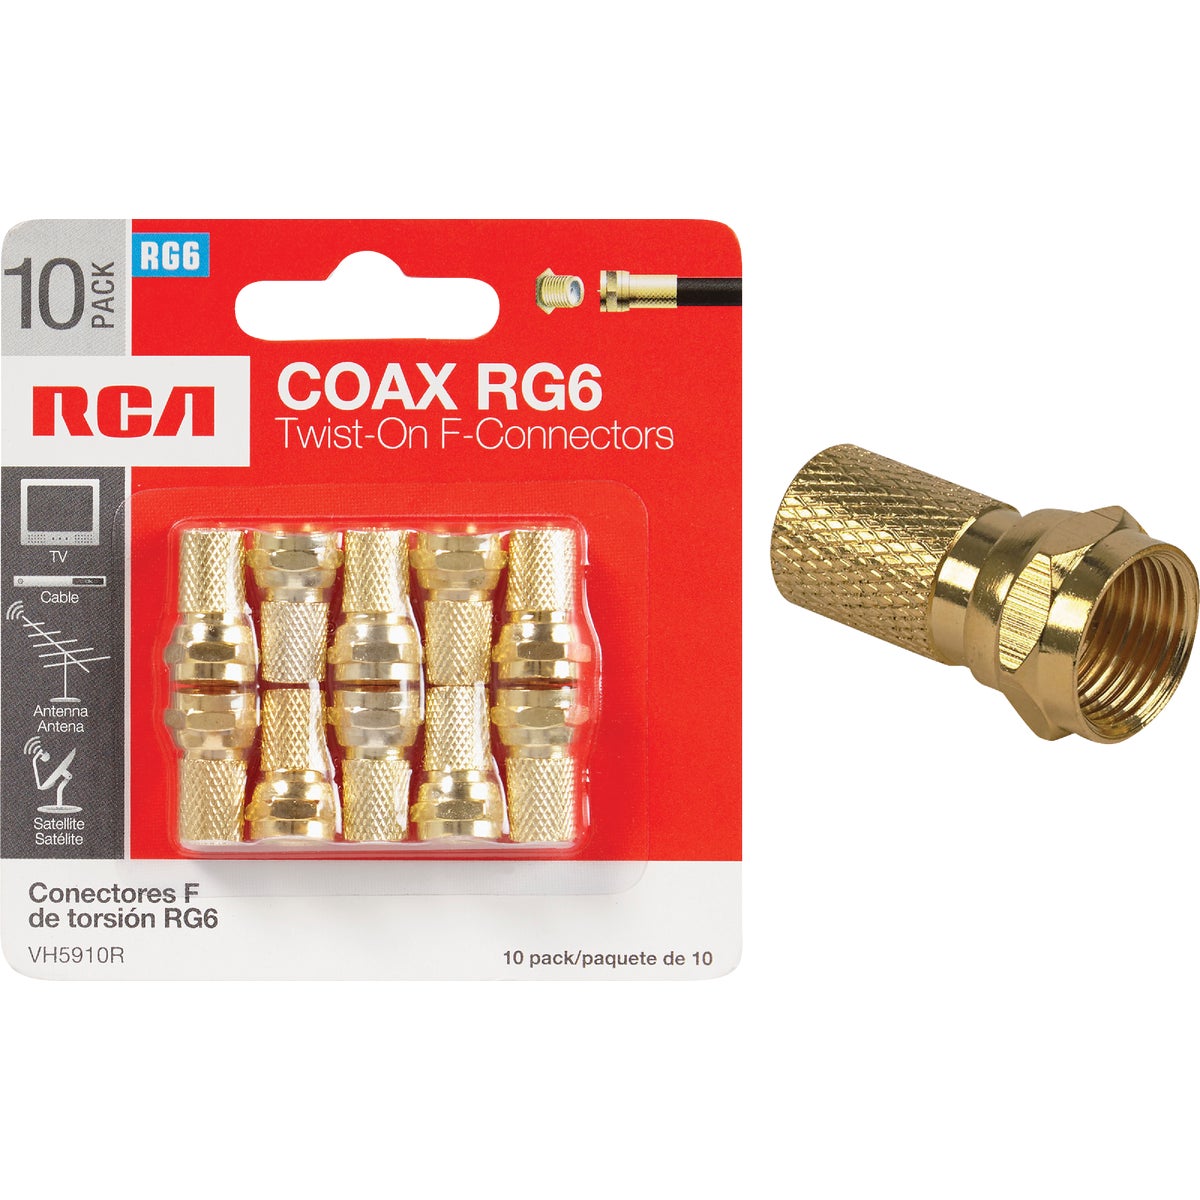 Item 523674, RG6 twist-on gold-plated F-connectors terminate coaxial cables for custom 